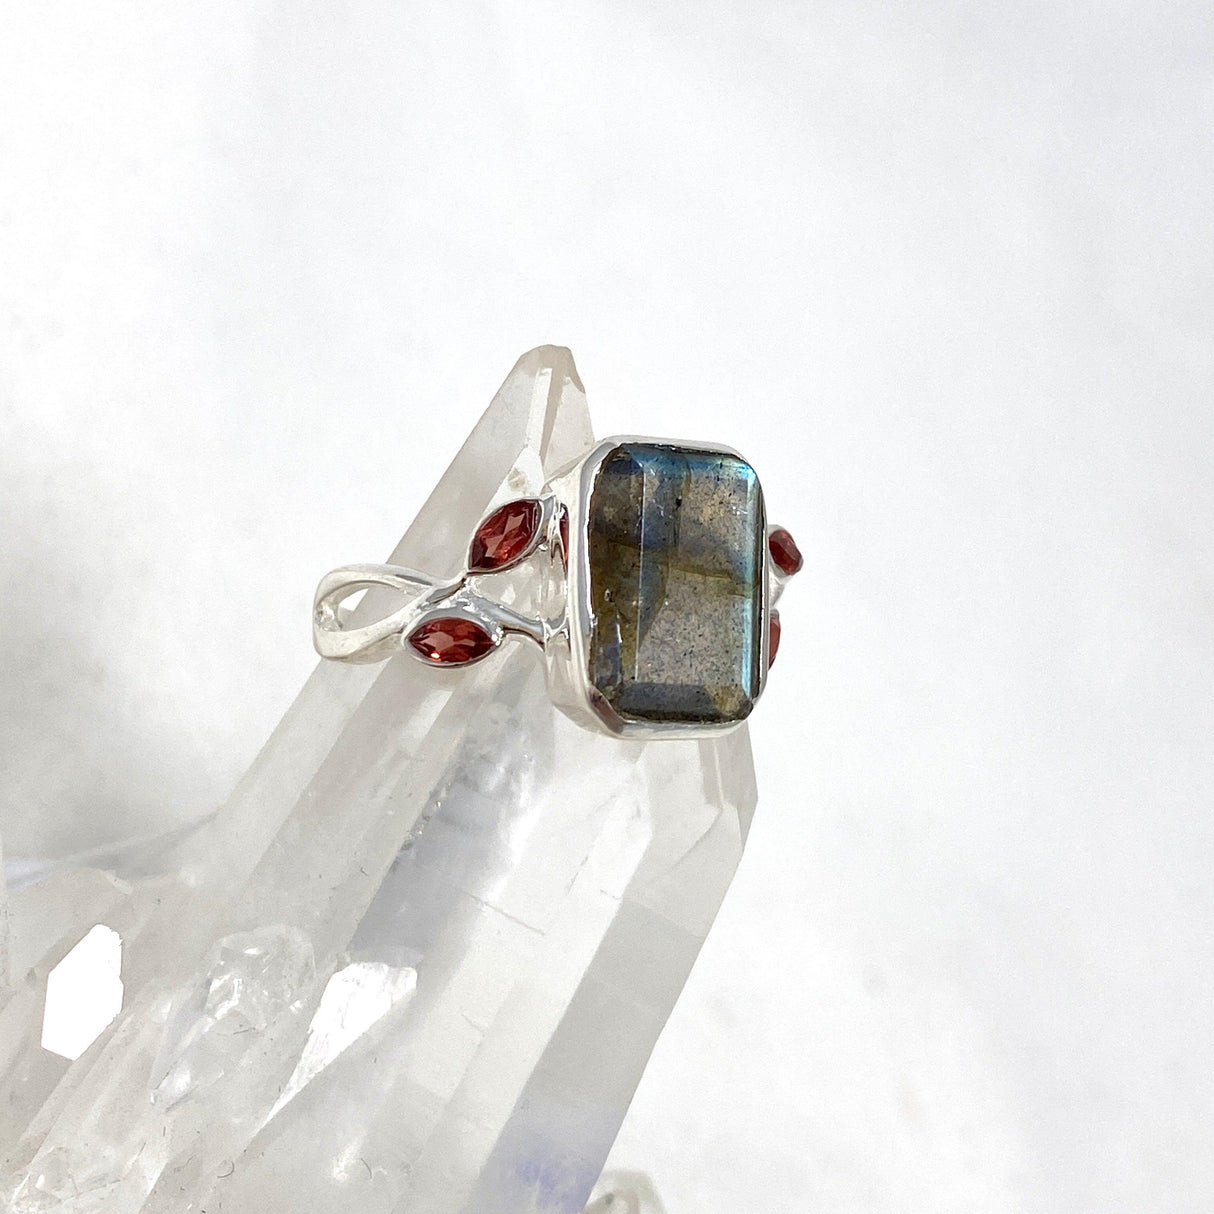 Labradorite Faceted Rectangular Multistone Ring with Botanical Details R3806 - Nature's Magick